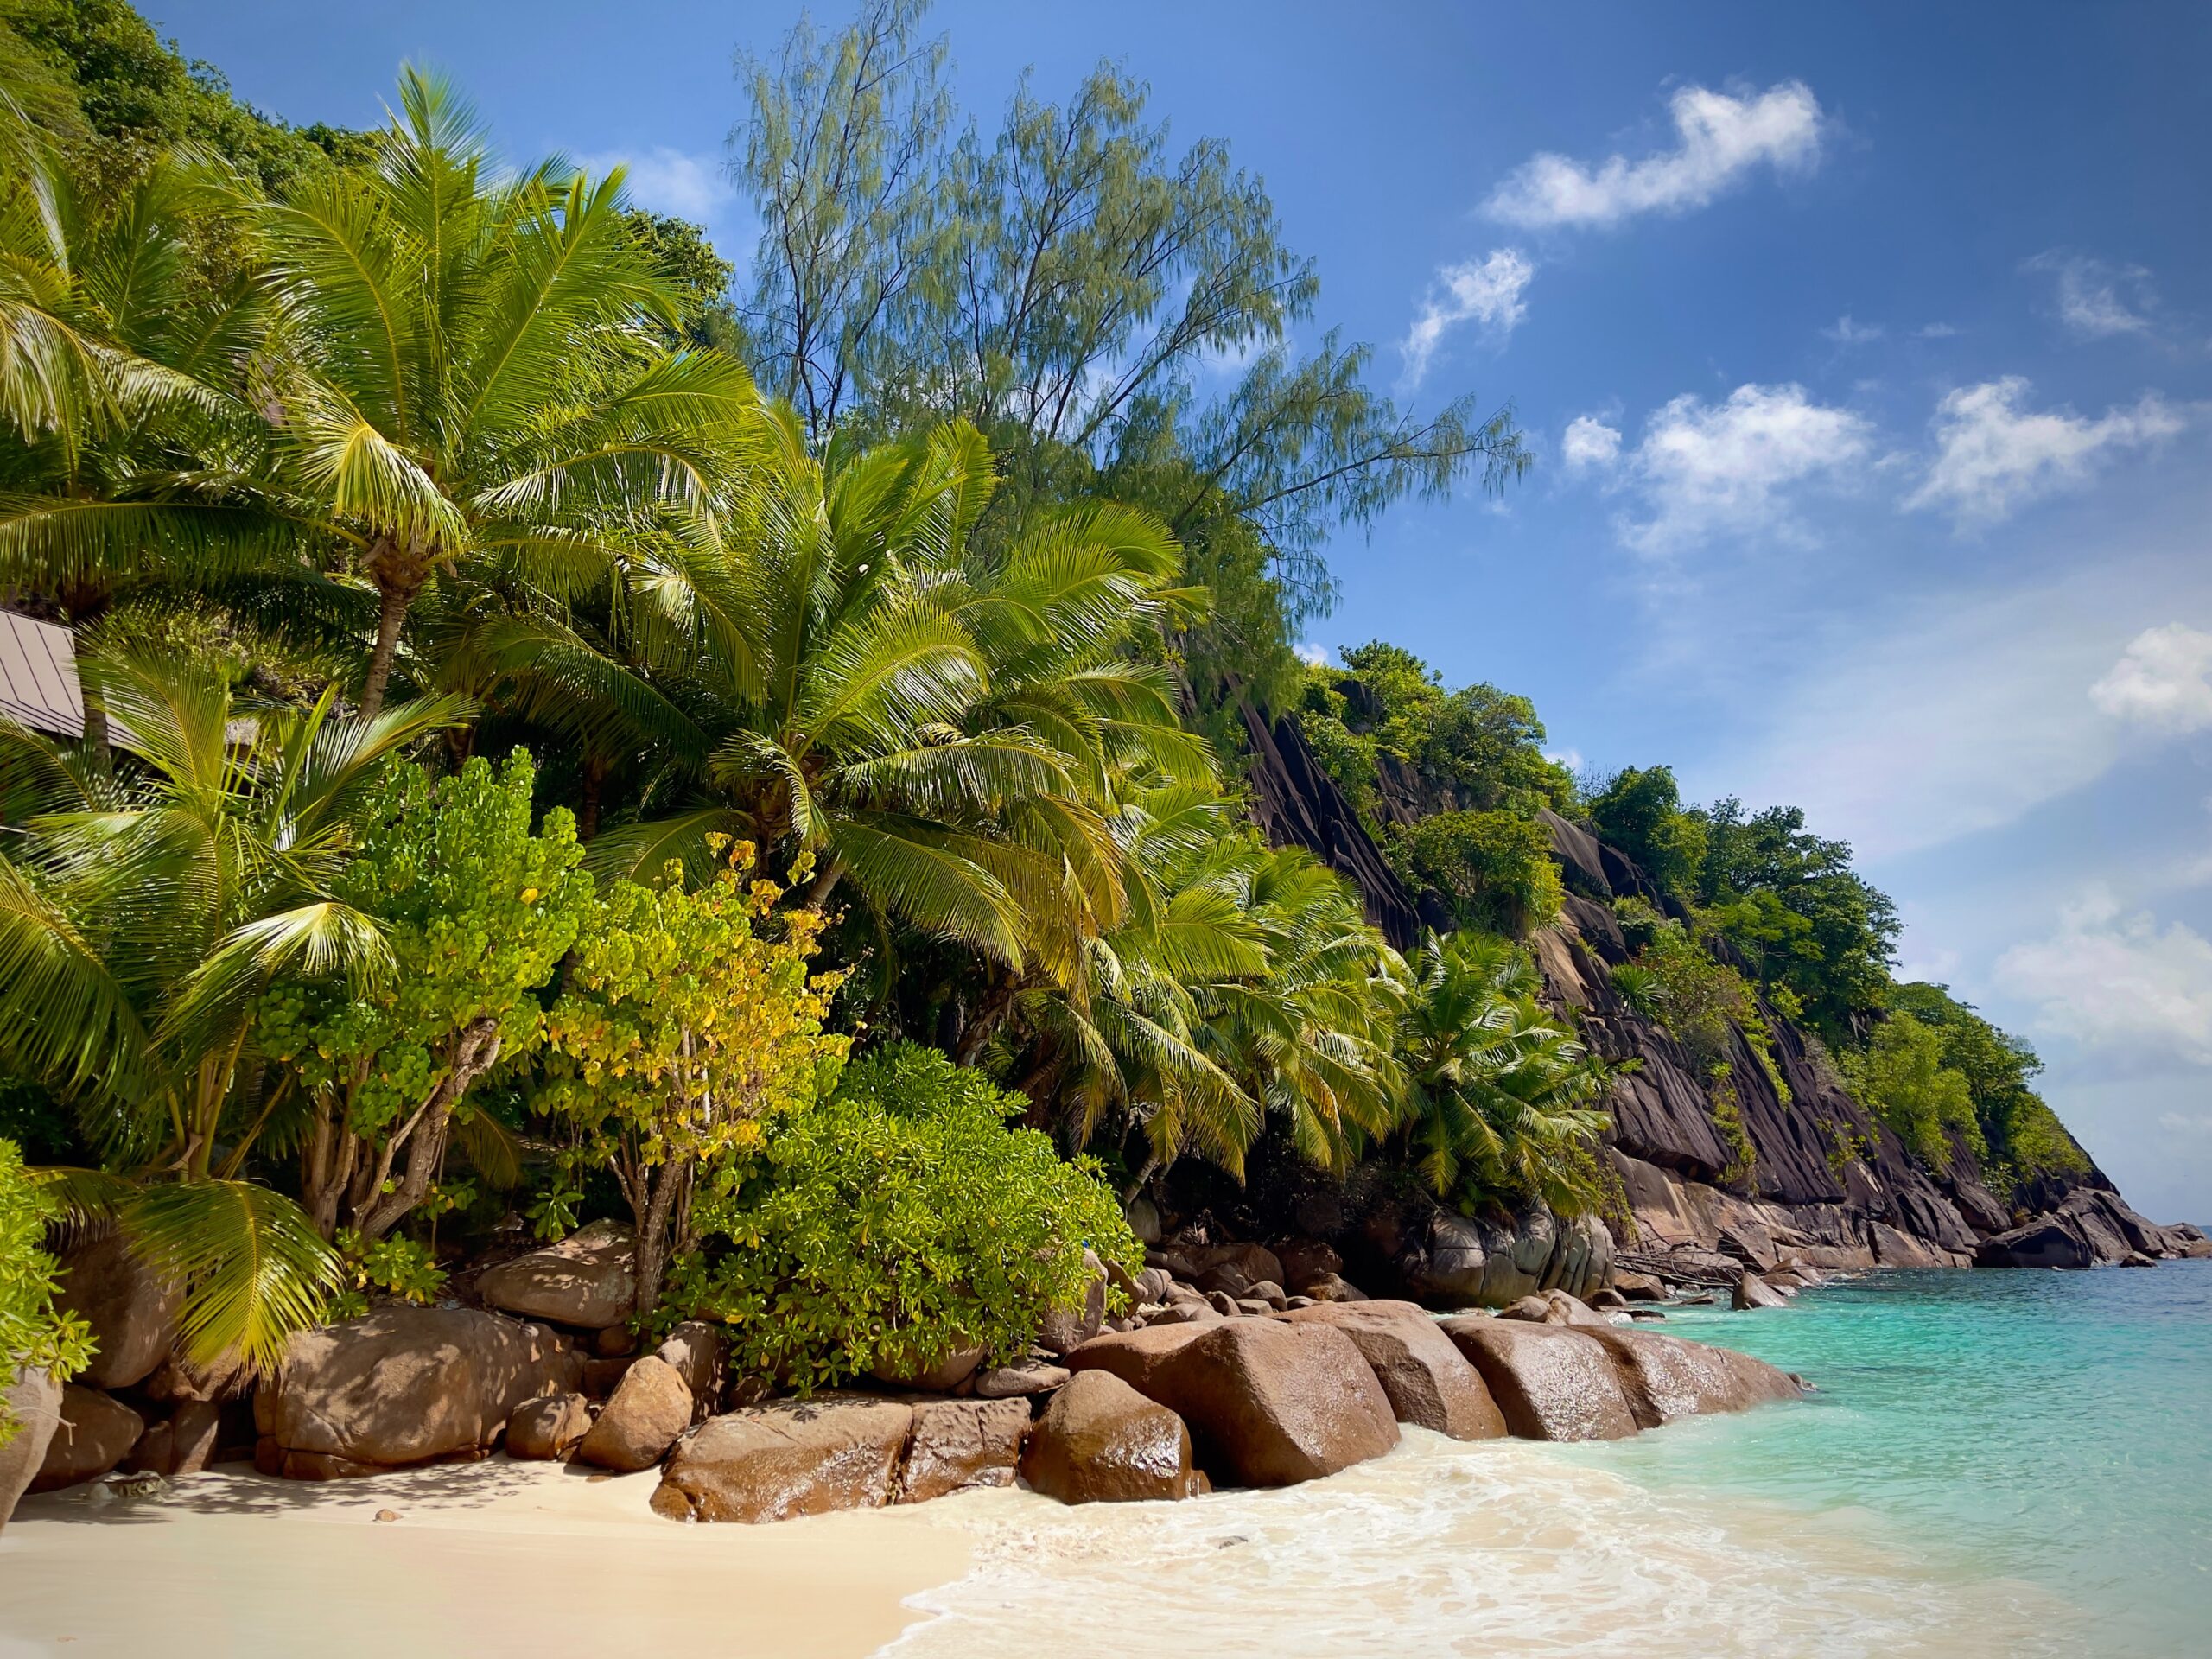 The Seychelles are home to some of the most perfect Beach Vacation Spots